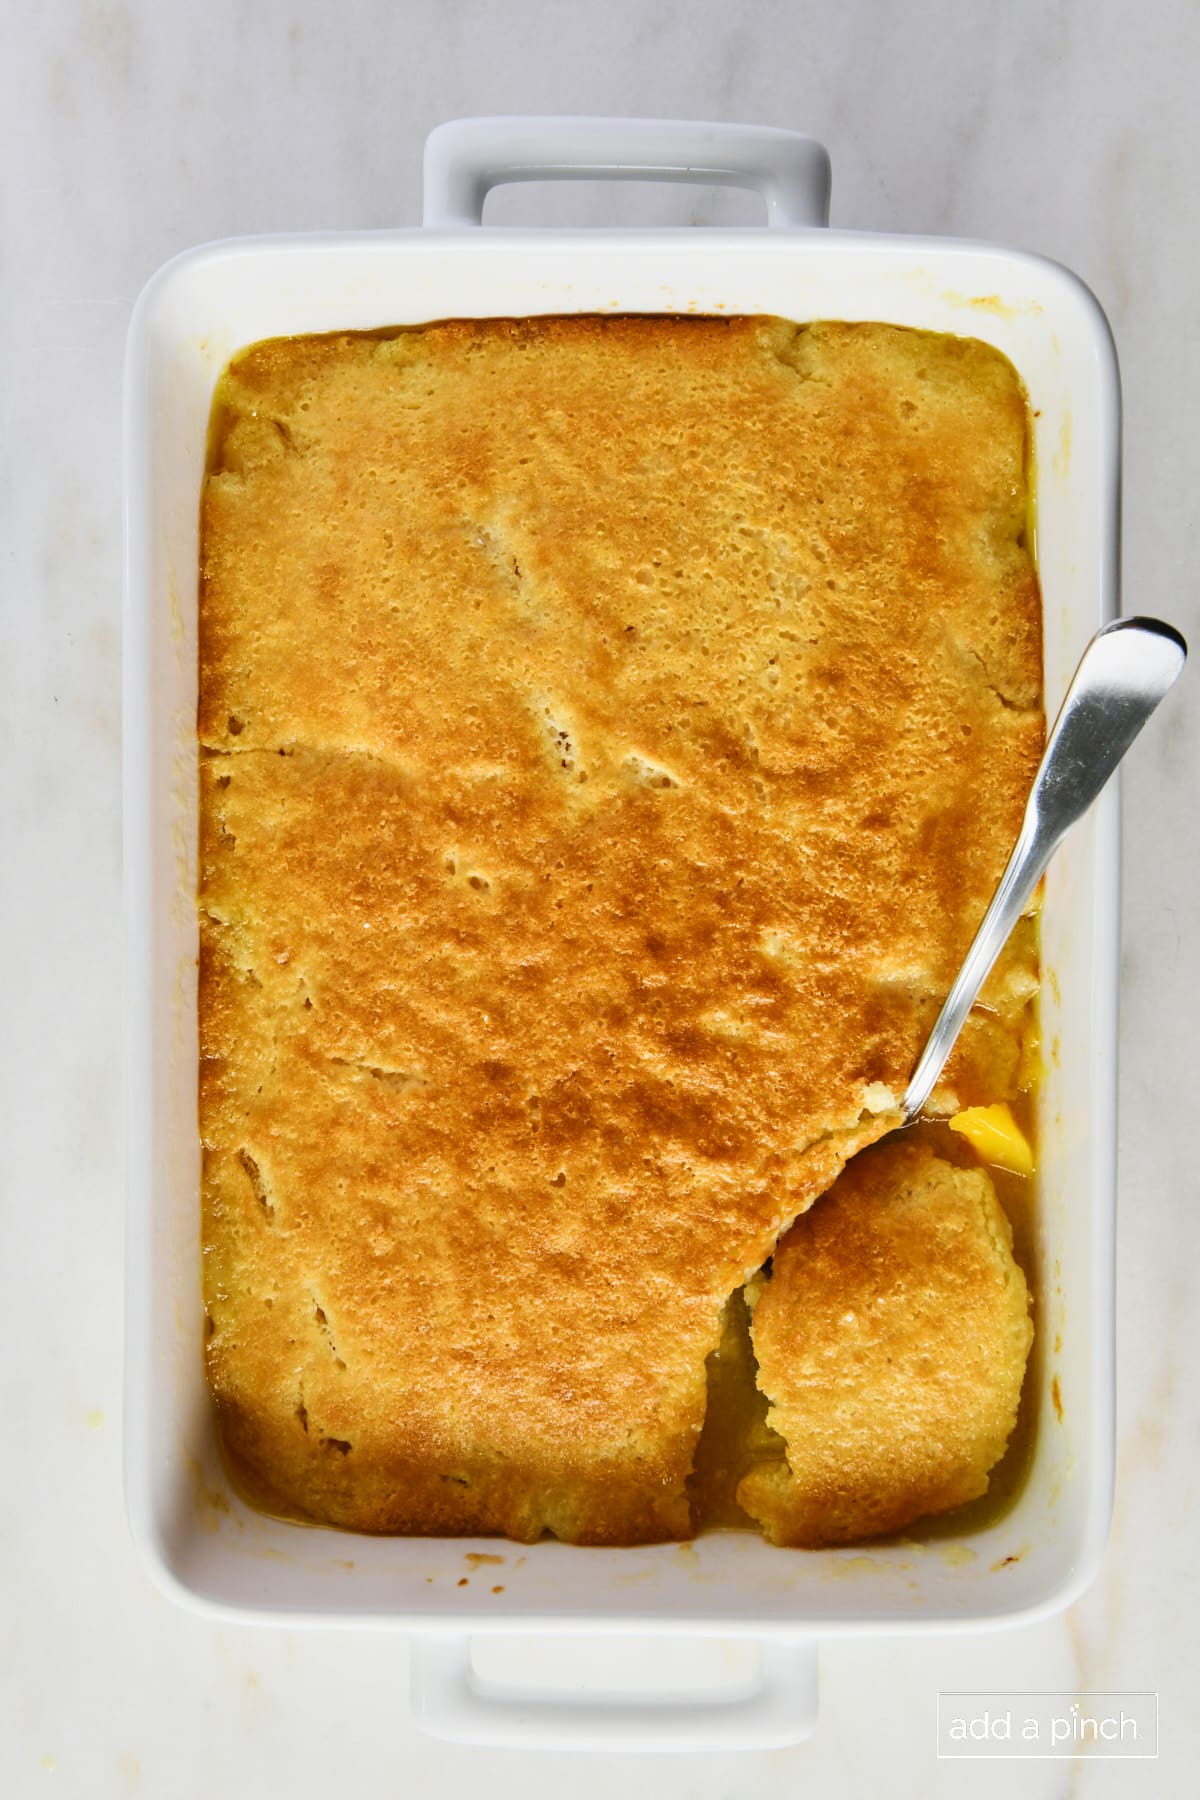 Baked peach cobbler in a white baking dish with a spoon